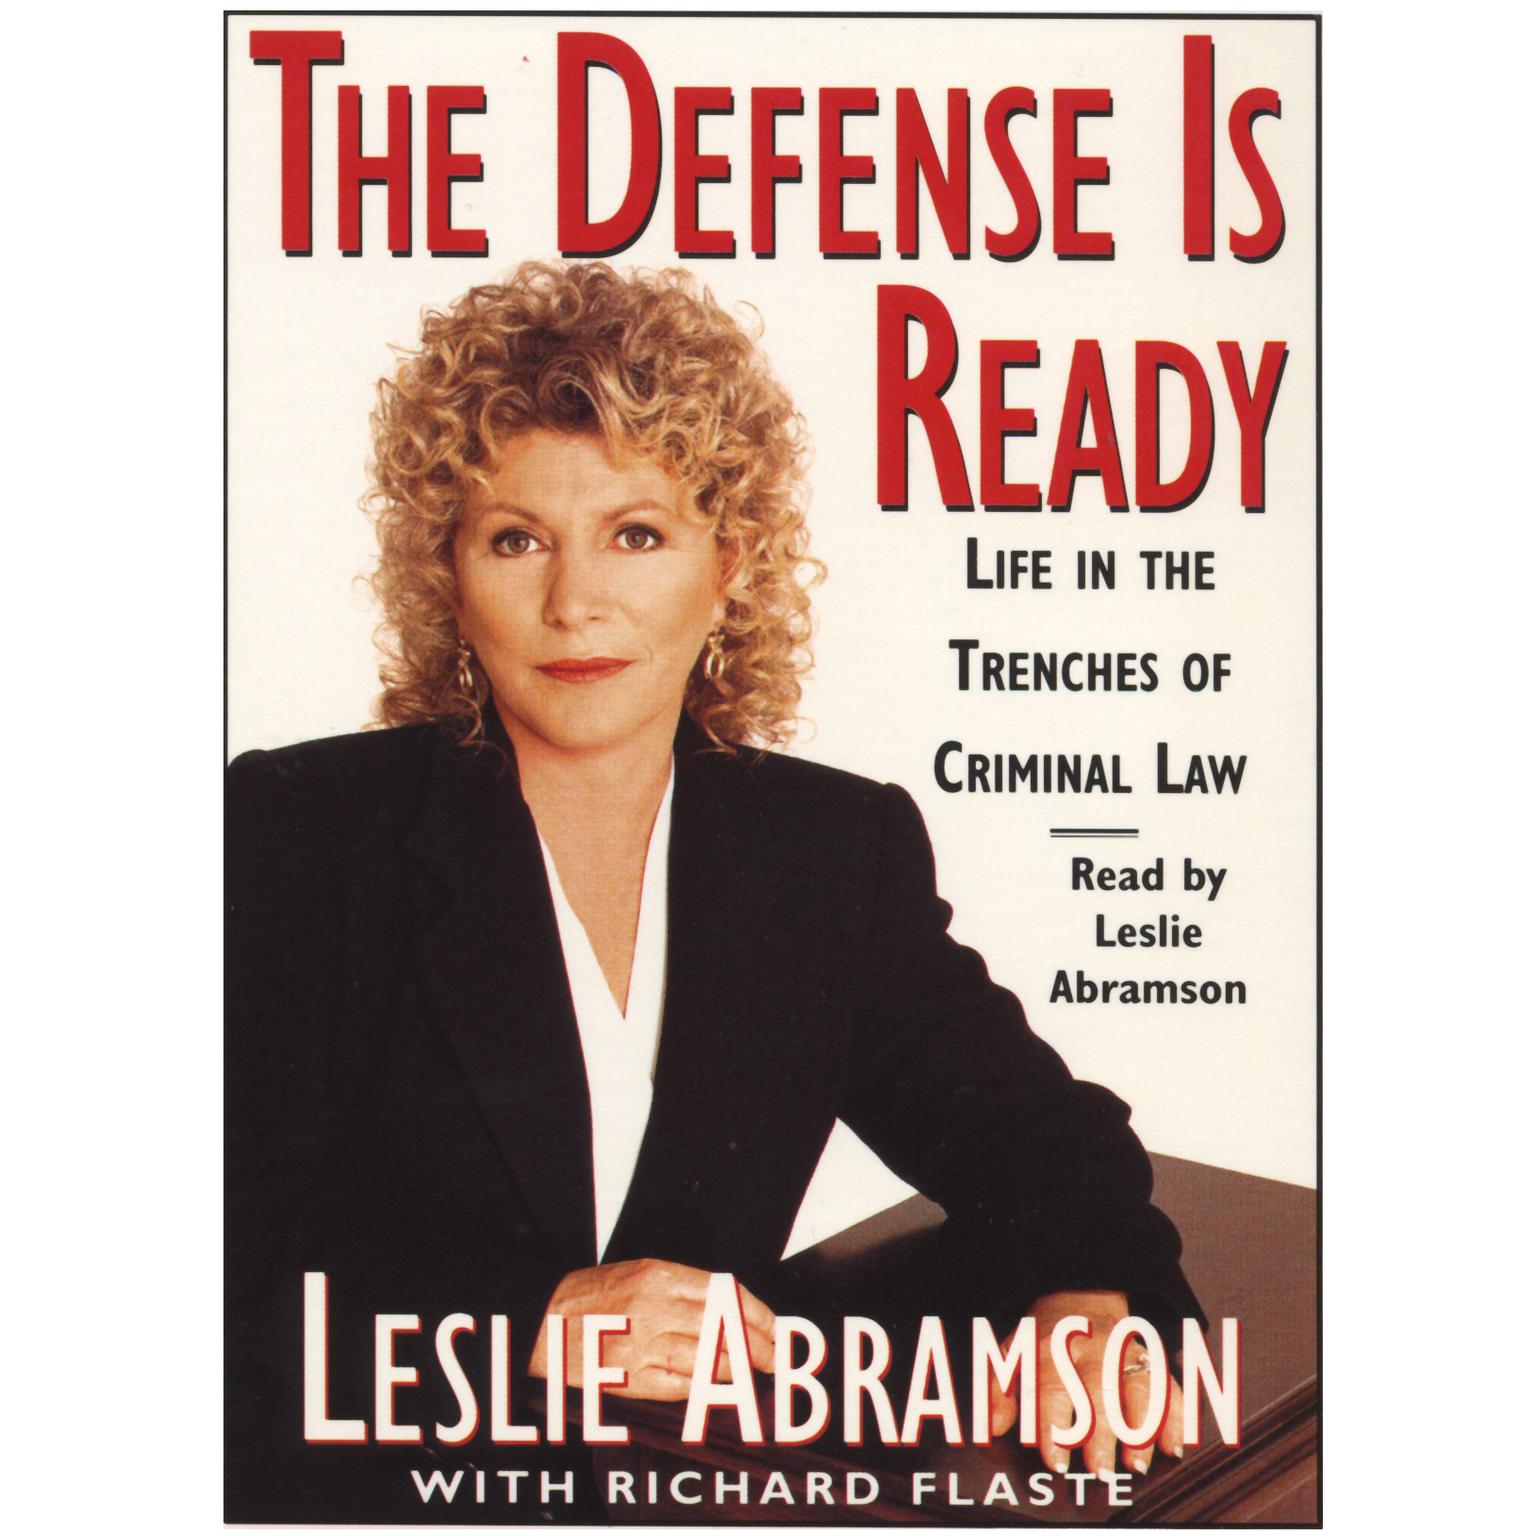 The Defense Is Ready: Life in the Trenches of Criminal Law (Abridged) Audiobook, by Leslie Abramson